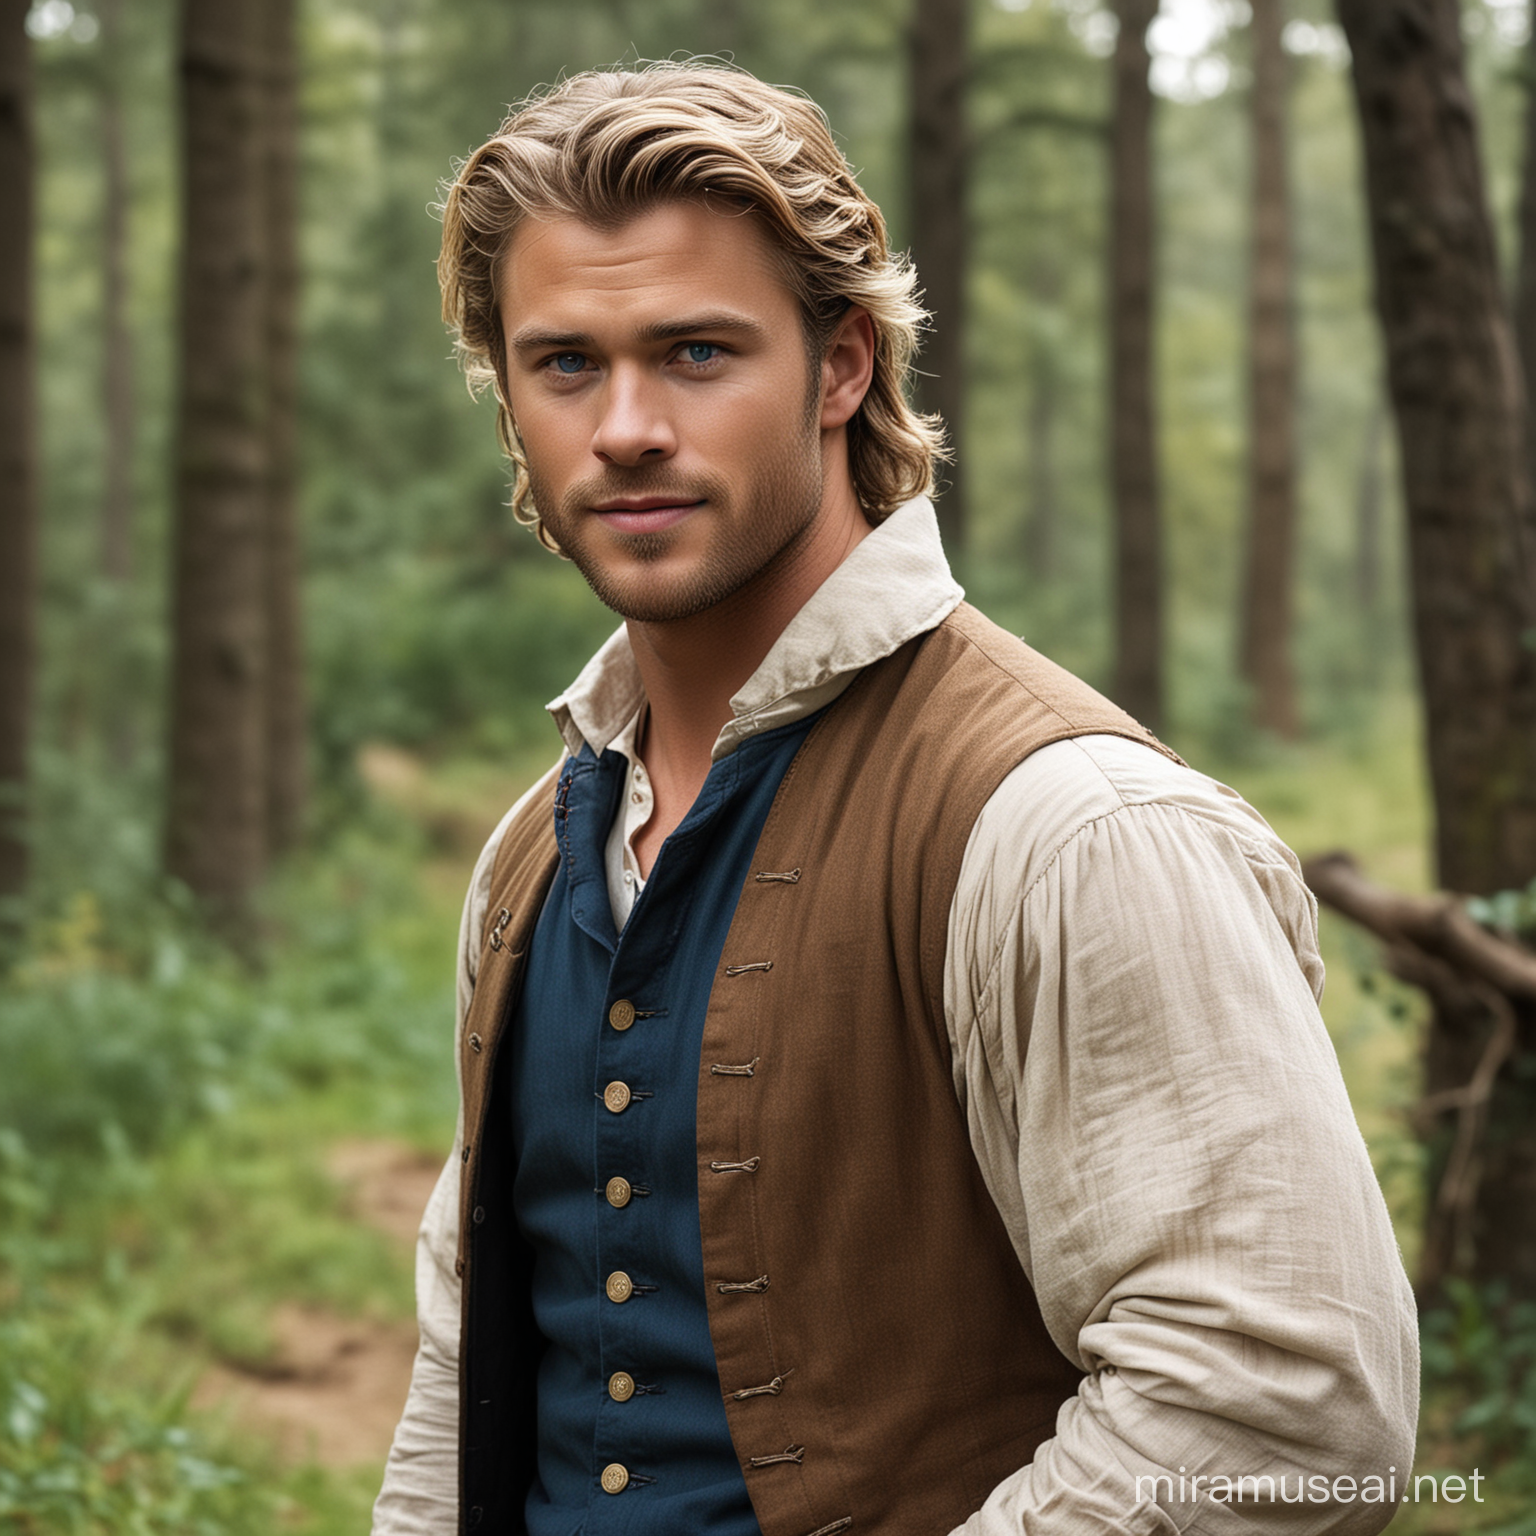 Dark blond haired 25 year old man with blue eyes dressed in 1700s clothing in a forest farm background. He's fit and muscular, handsome with a kind smile and looks like Chris Hemsworth